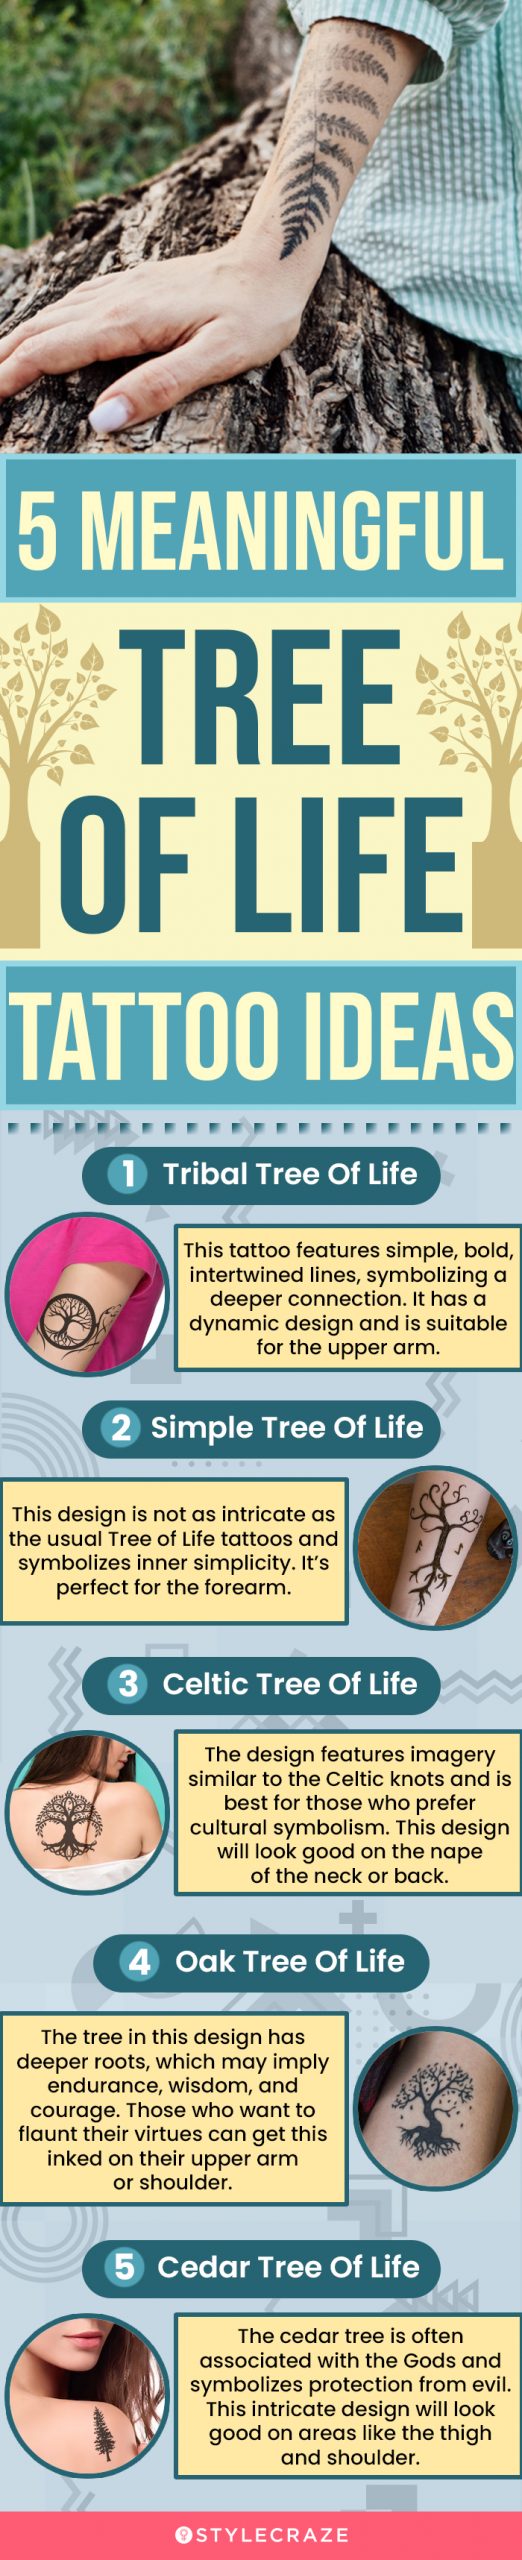 5 meaningful tree of life tattoo ideas (infographic)